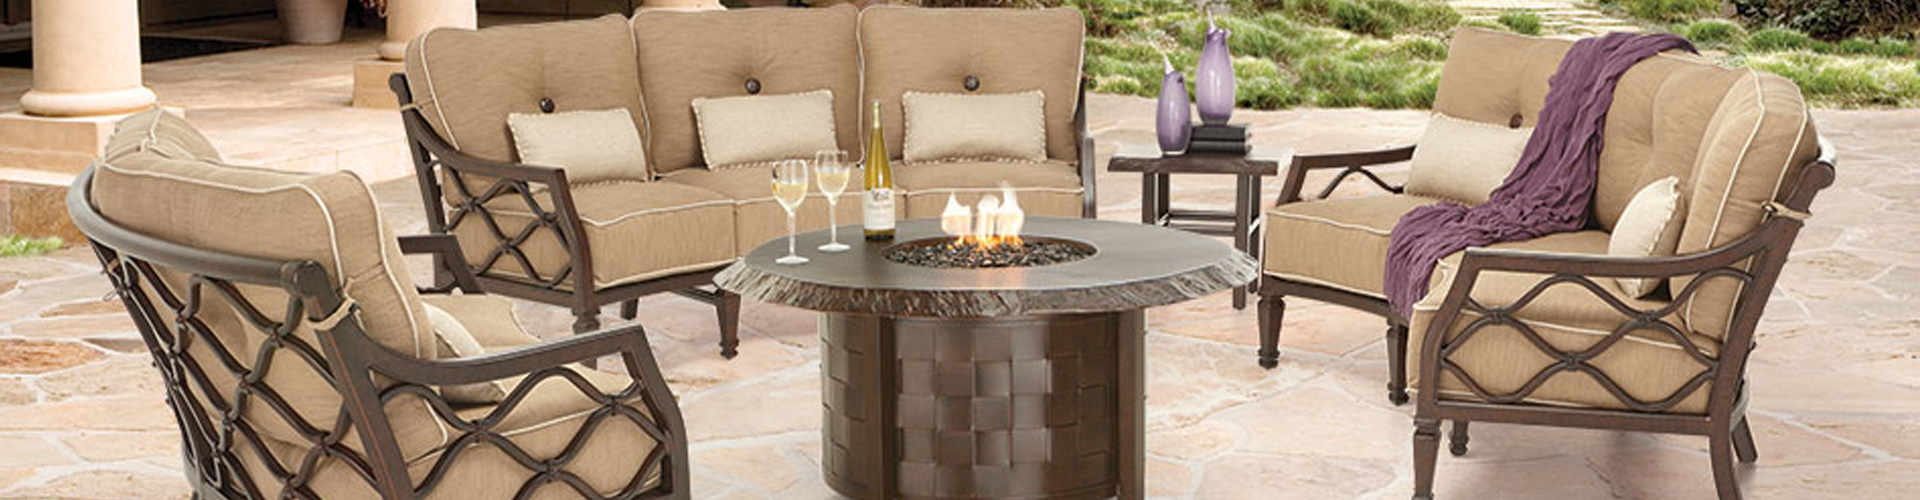 Castelle Fire Pits